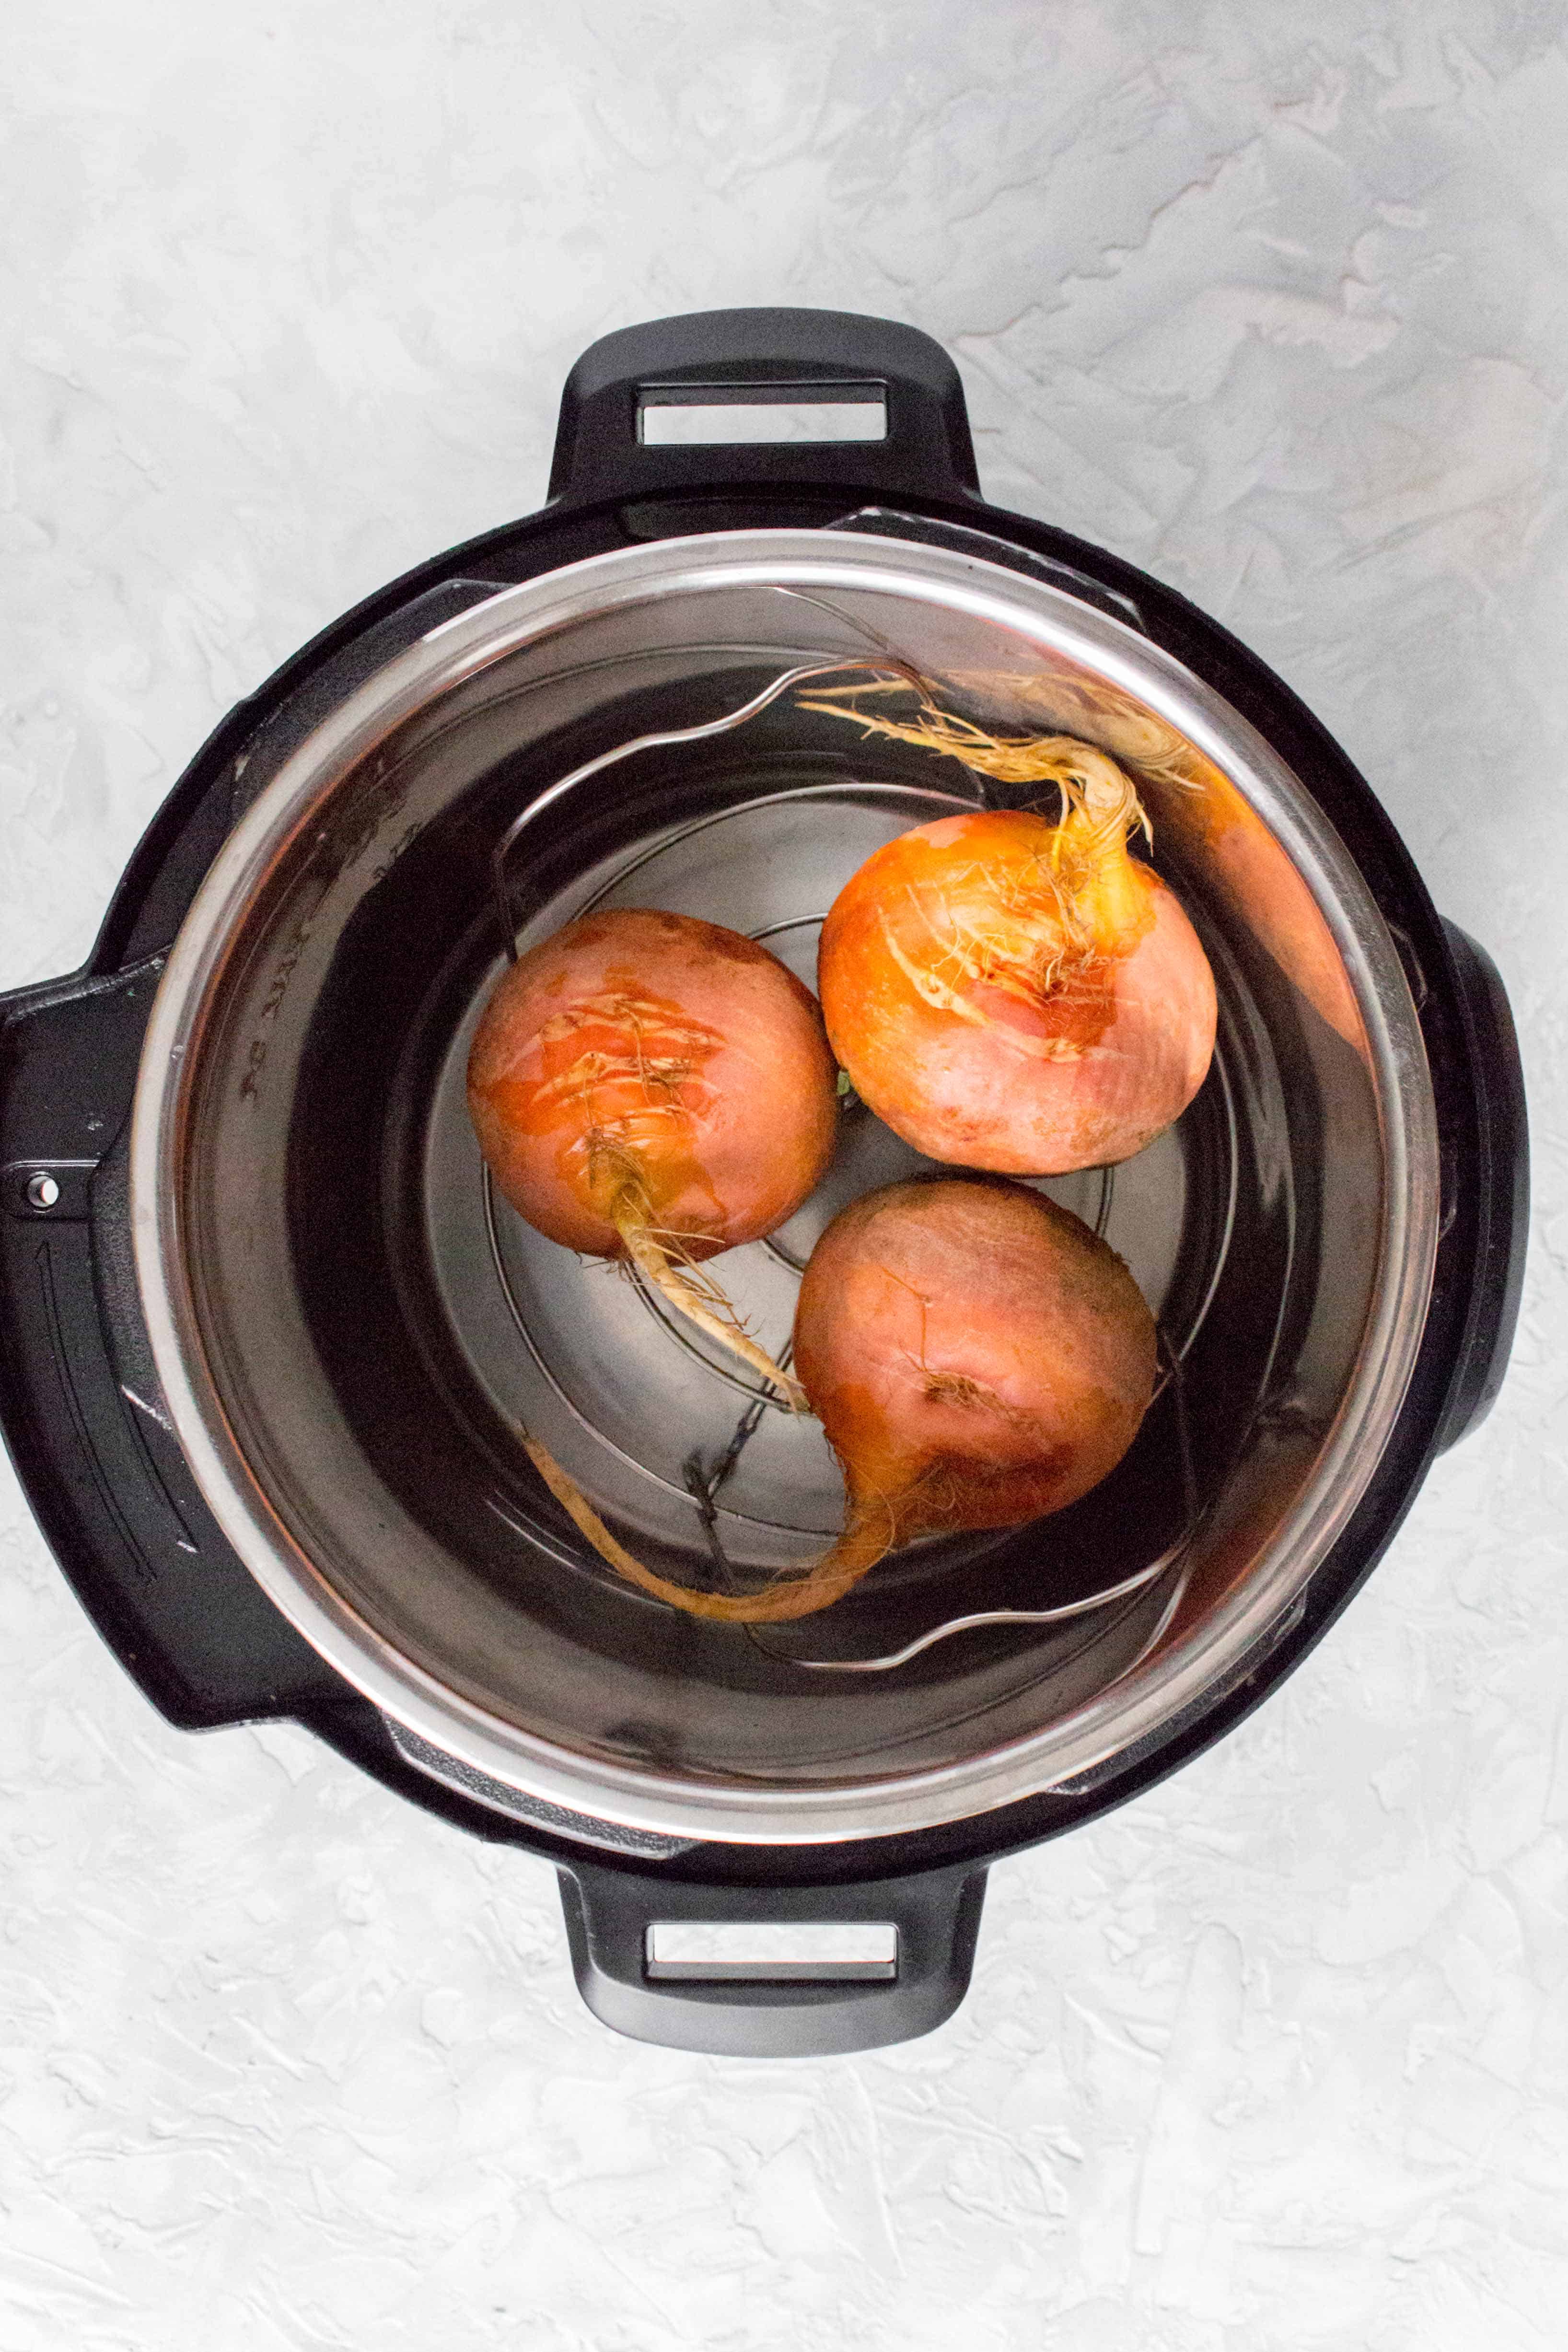 How To Make Instant Pot Beets